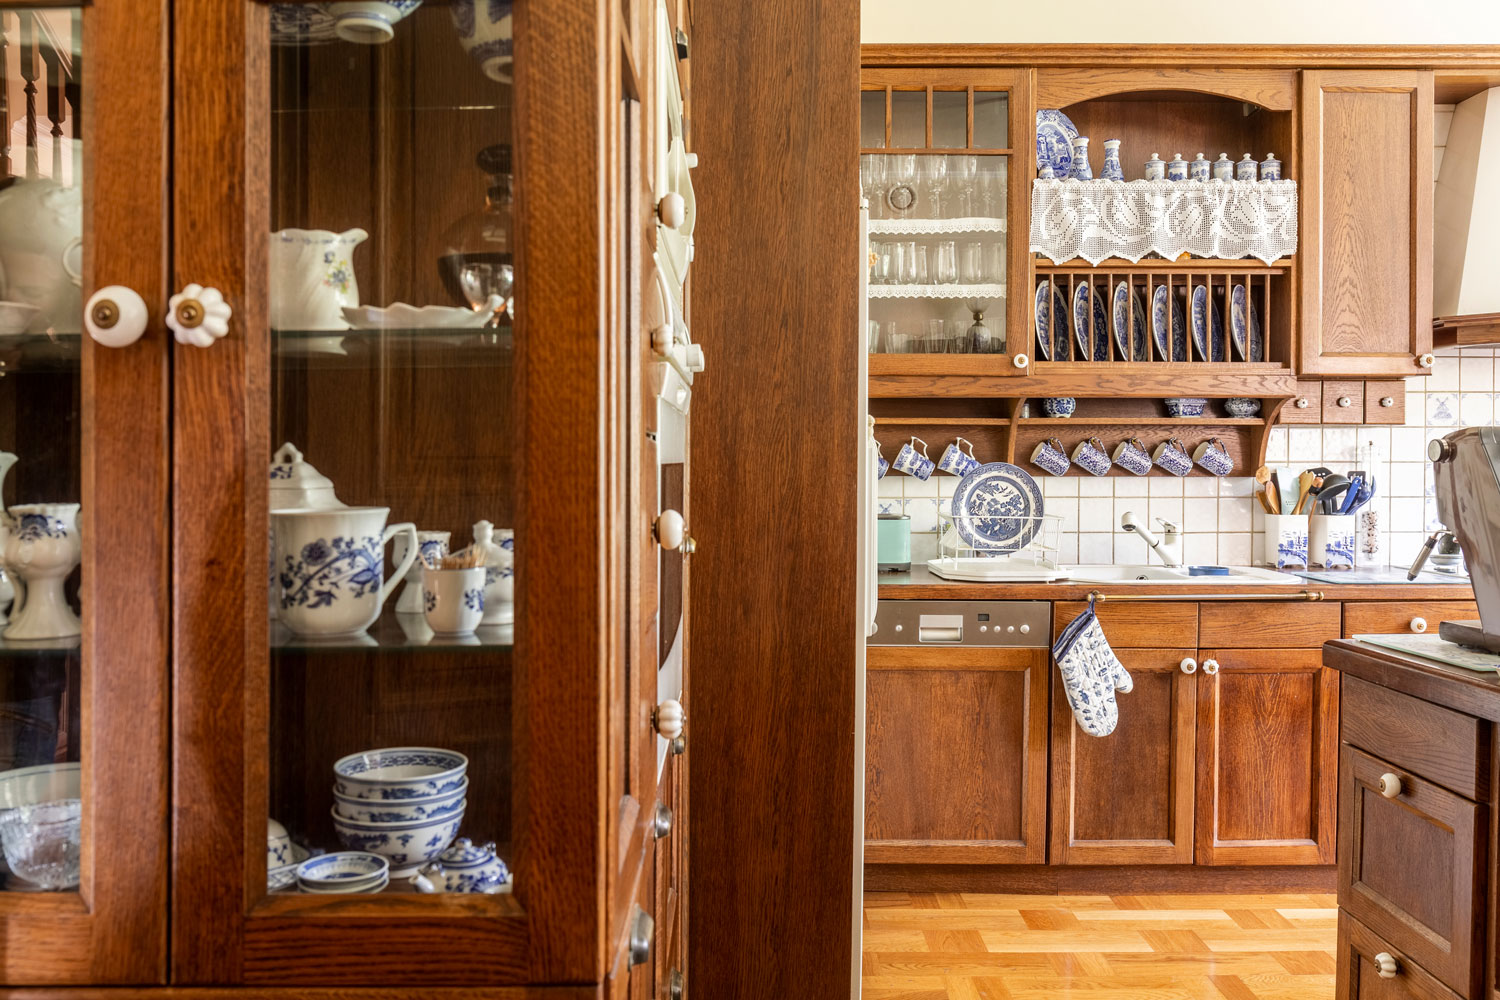 A kitchen filled with China cabinets filled with expensive Chinas